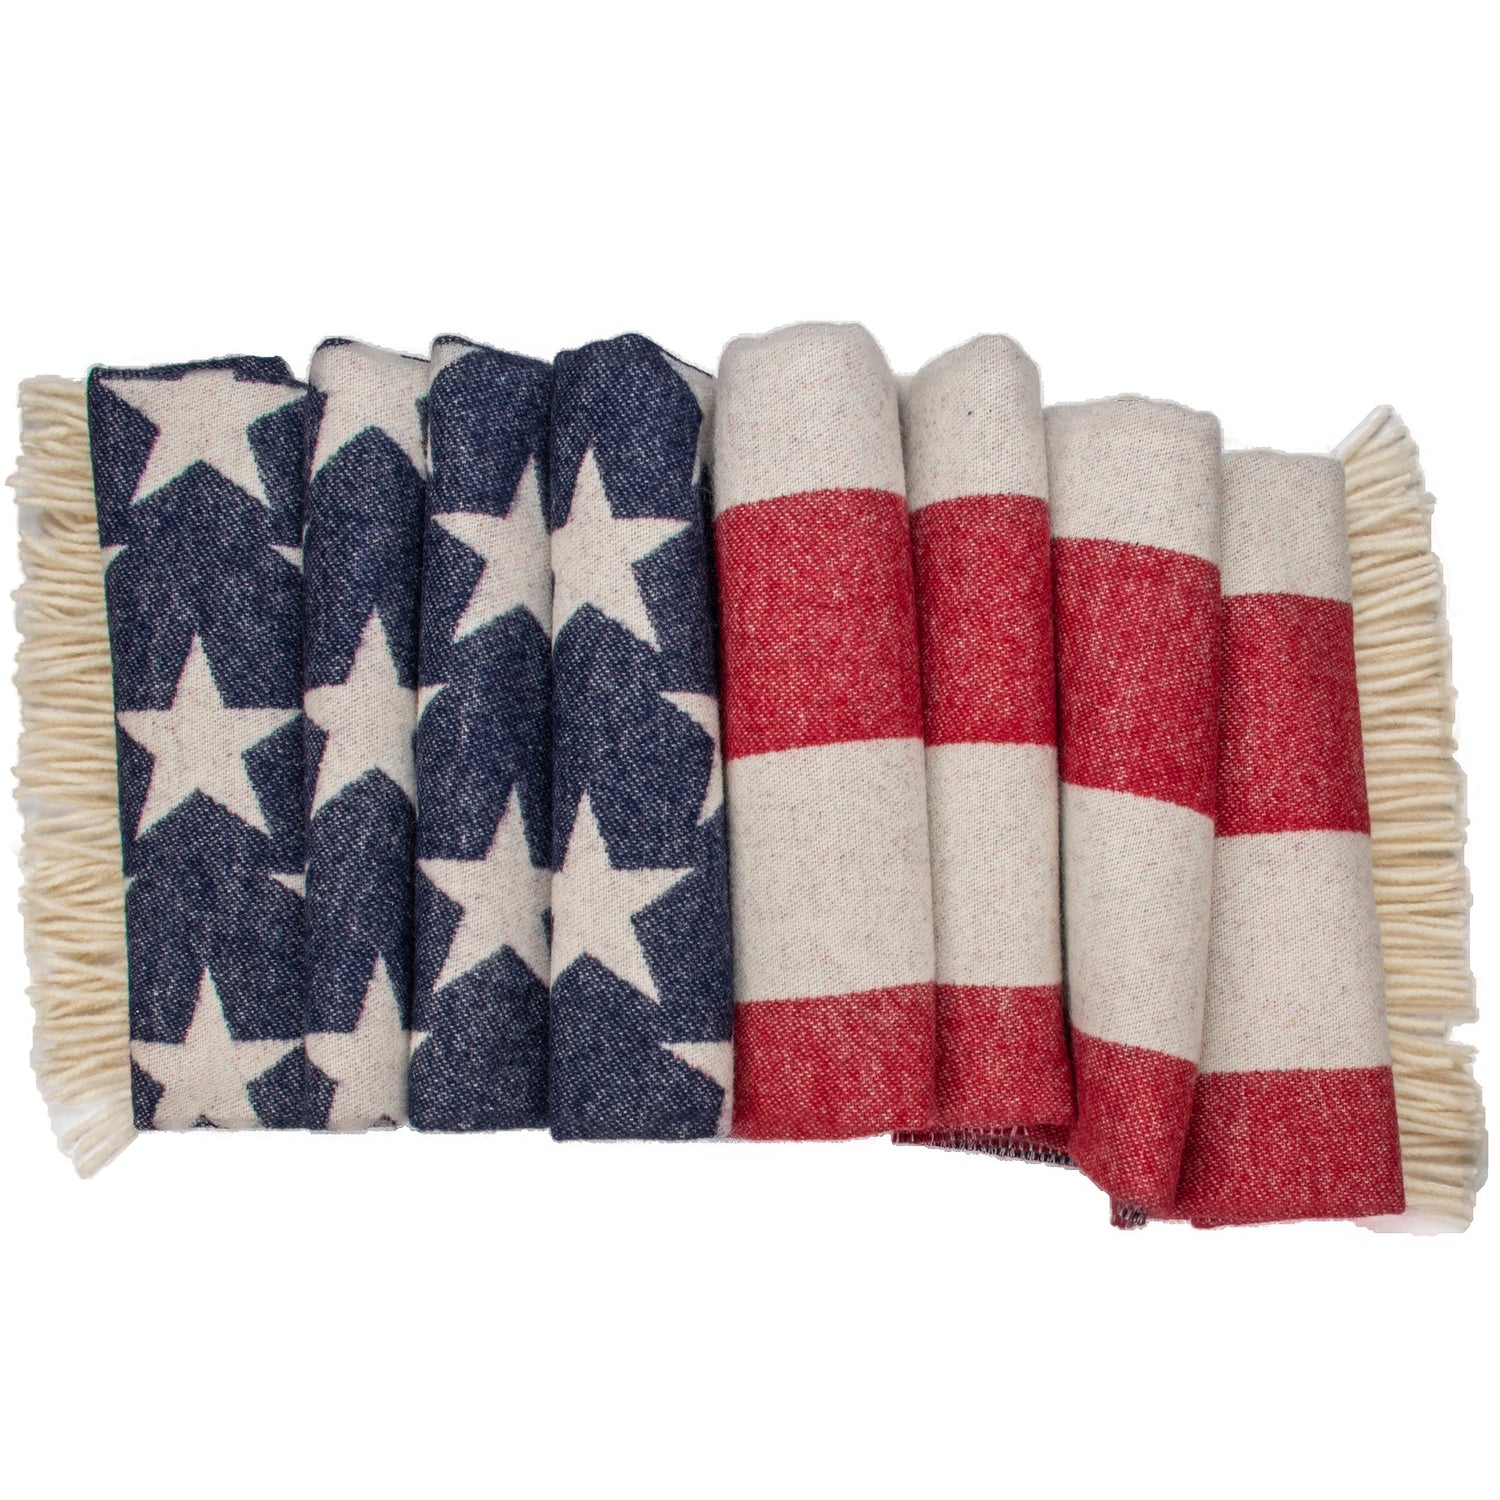 Prince of Scots American Flag Merino Wool Throw-Throws and Blankets-00810032752392-USAFlag-Prince of Scots